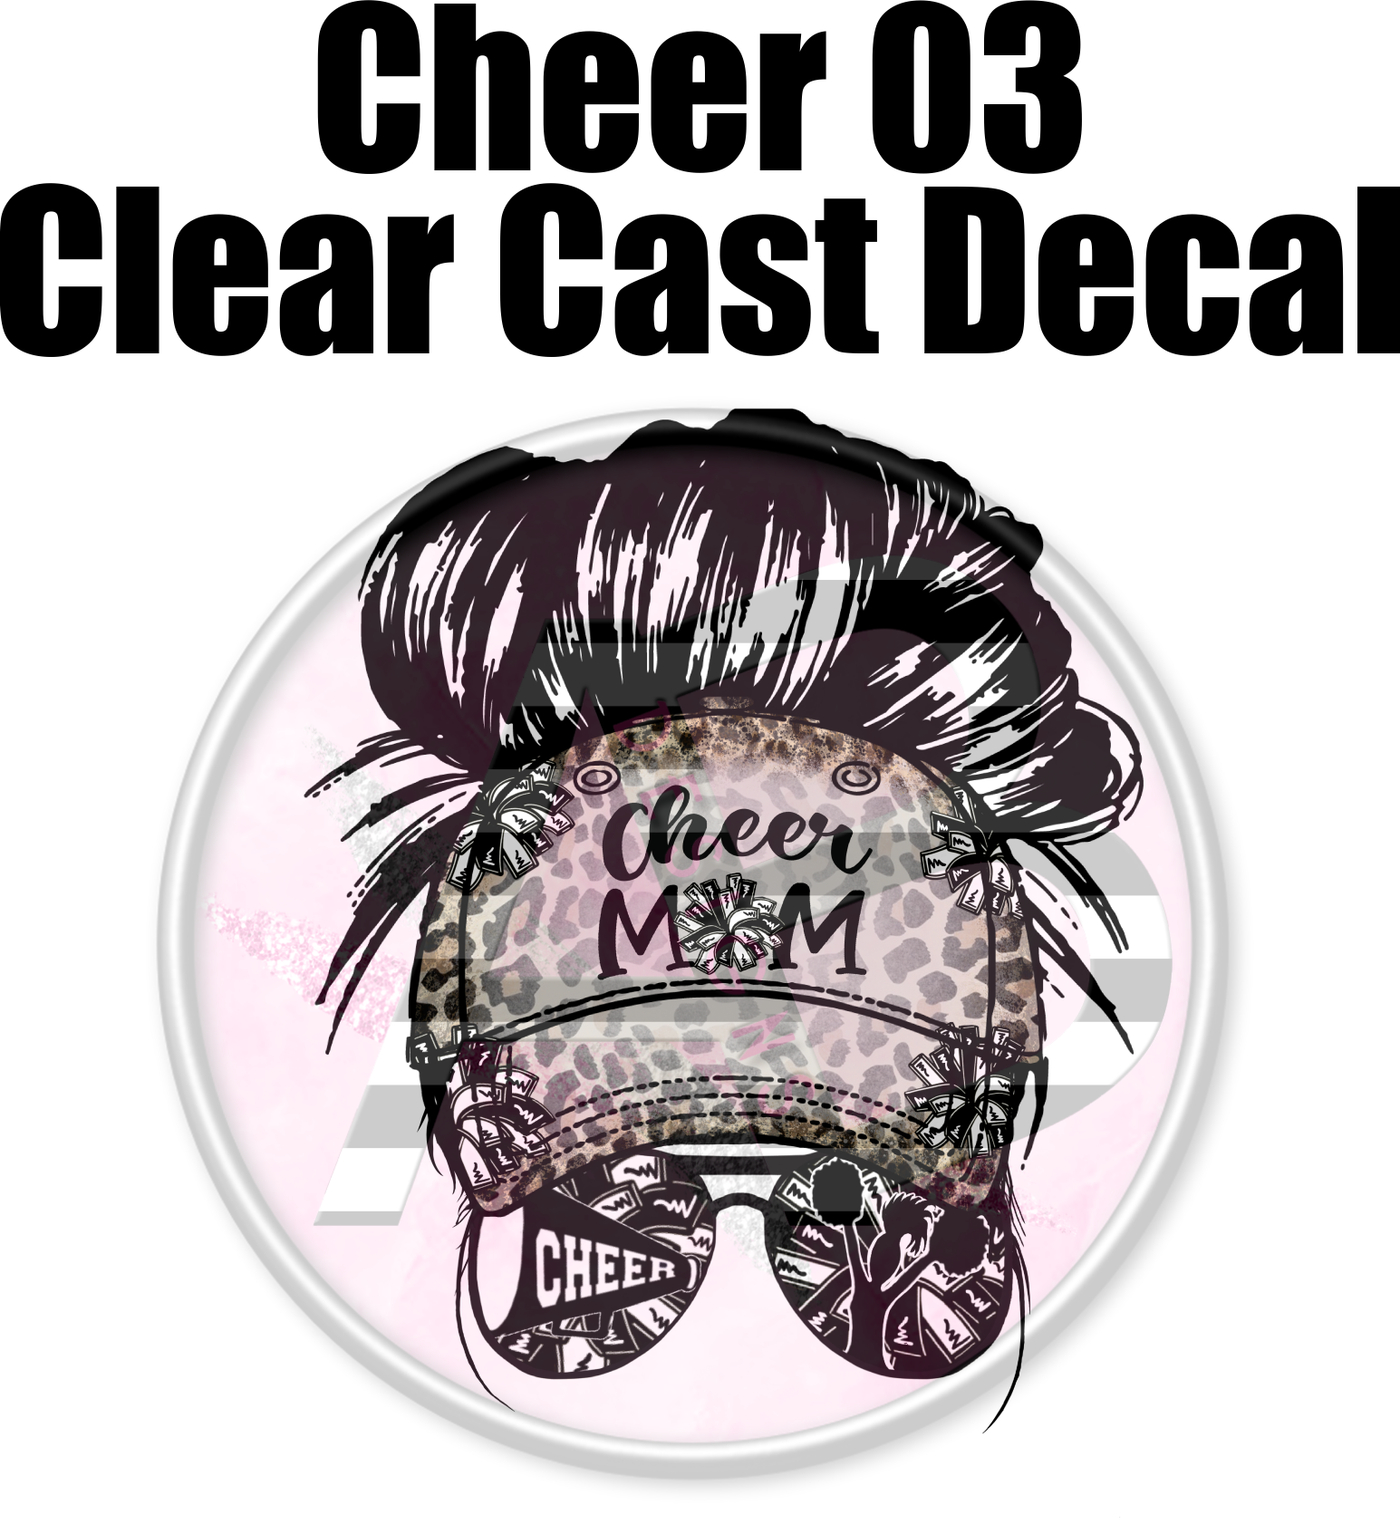 Cheer 03 - Clear Cast Decal